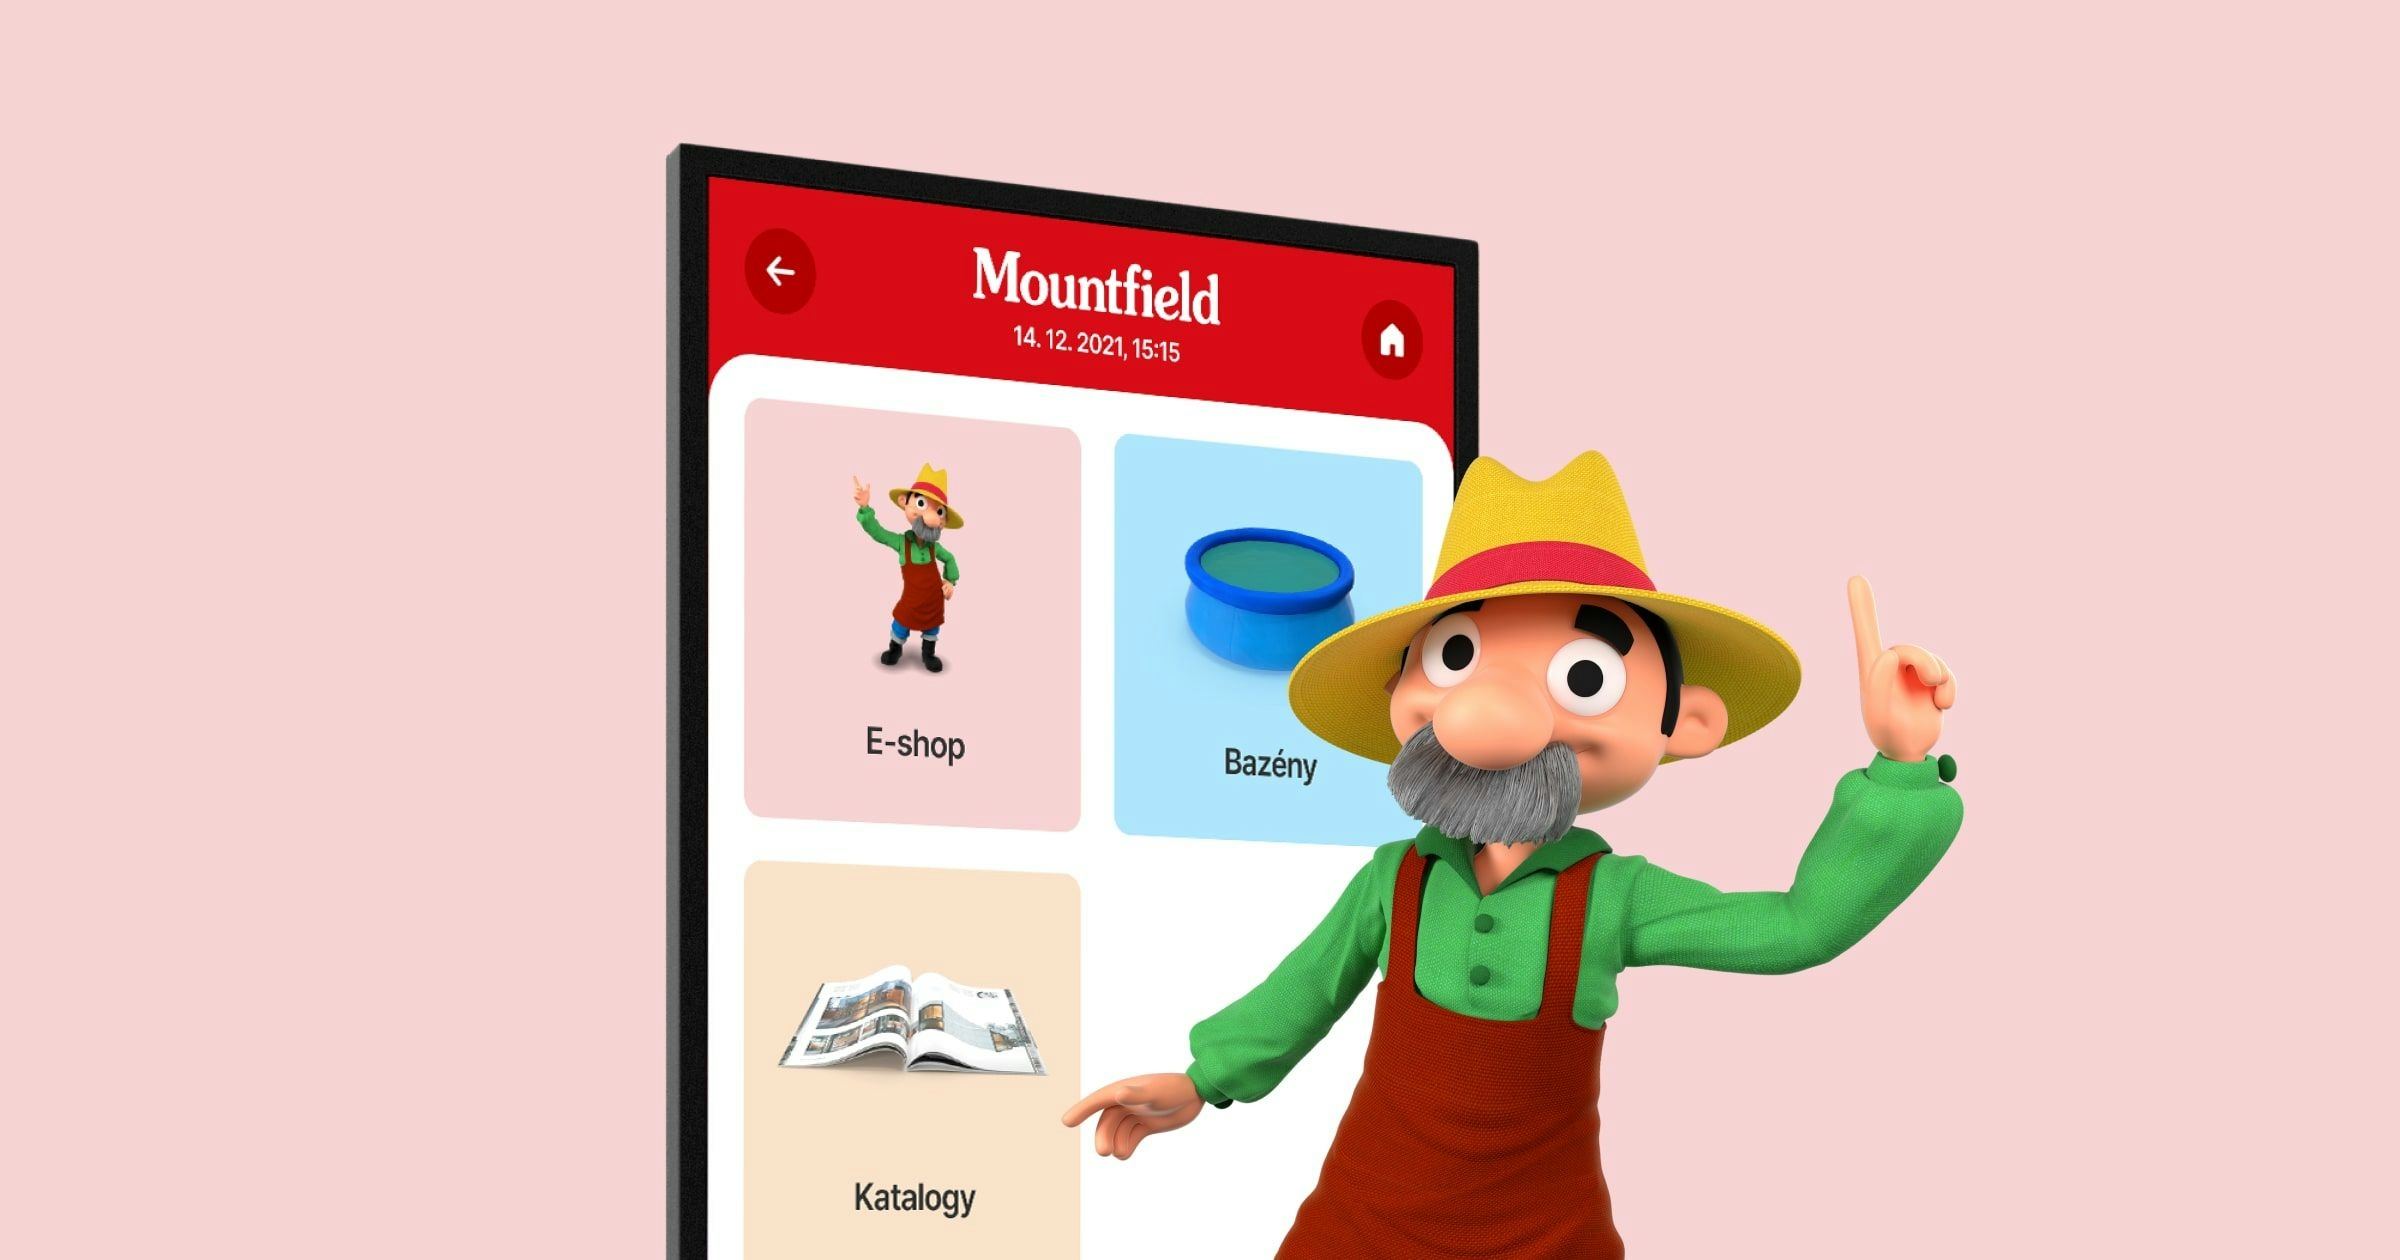 Mounfield launches a new application for their in-store kiosks